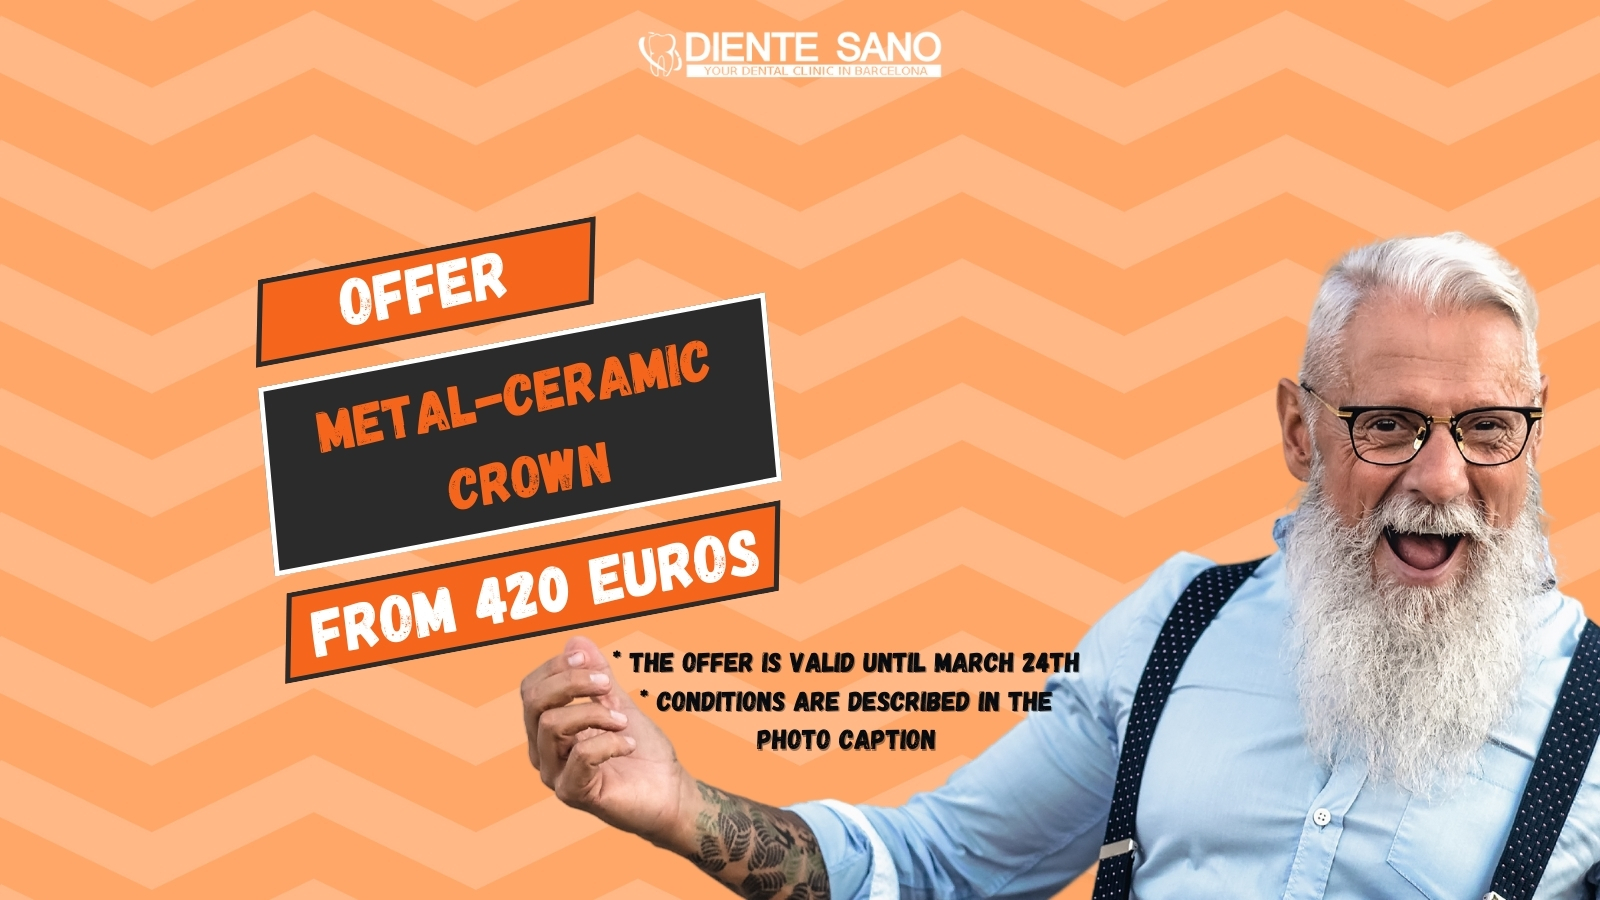 Restore the beauty and functionality of your smile with an advantageous offer from Diente Sano Dental Clinic in Barcelona! We are pleased to offer you a metal-ceramic crown at a special price starting from 420 euros. This is the perfect solution for tooth restoration, combining the strength of metal with the natural appearance of ceramic.